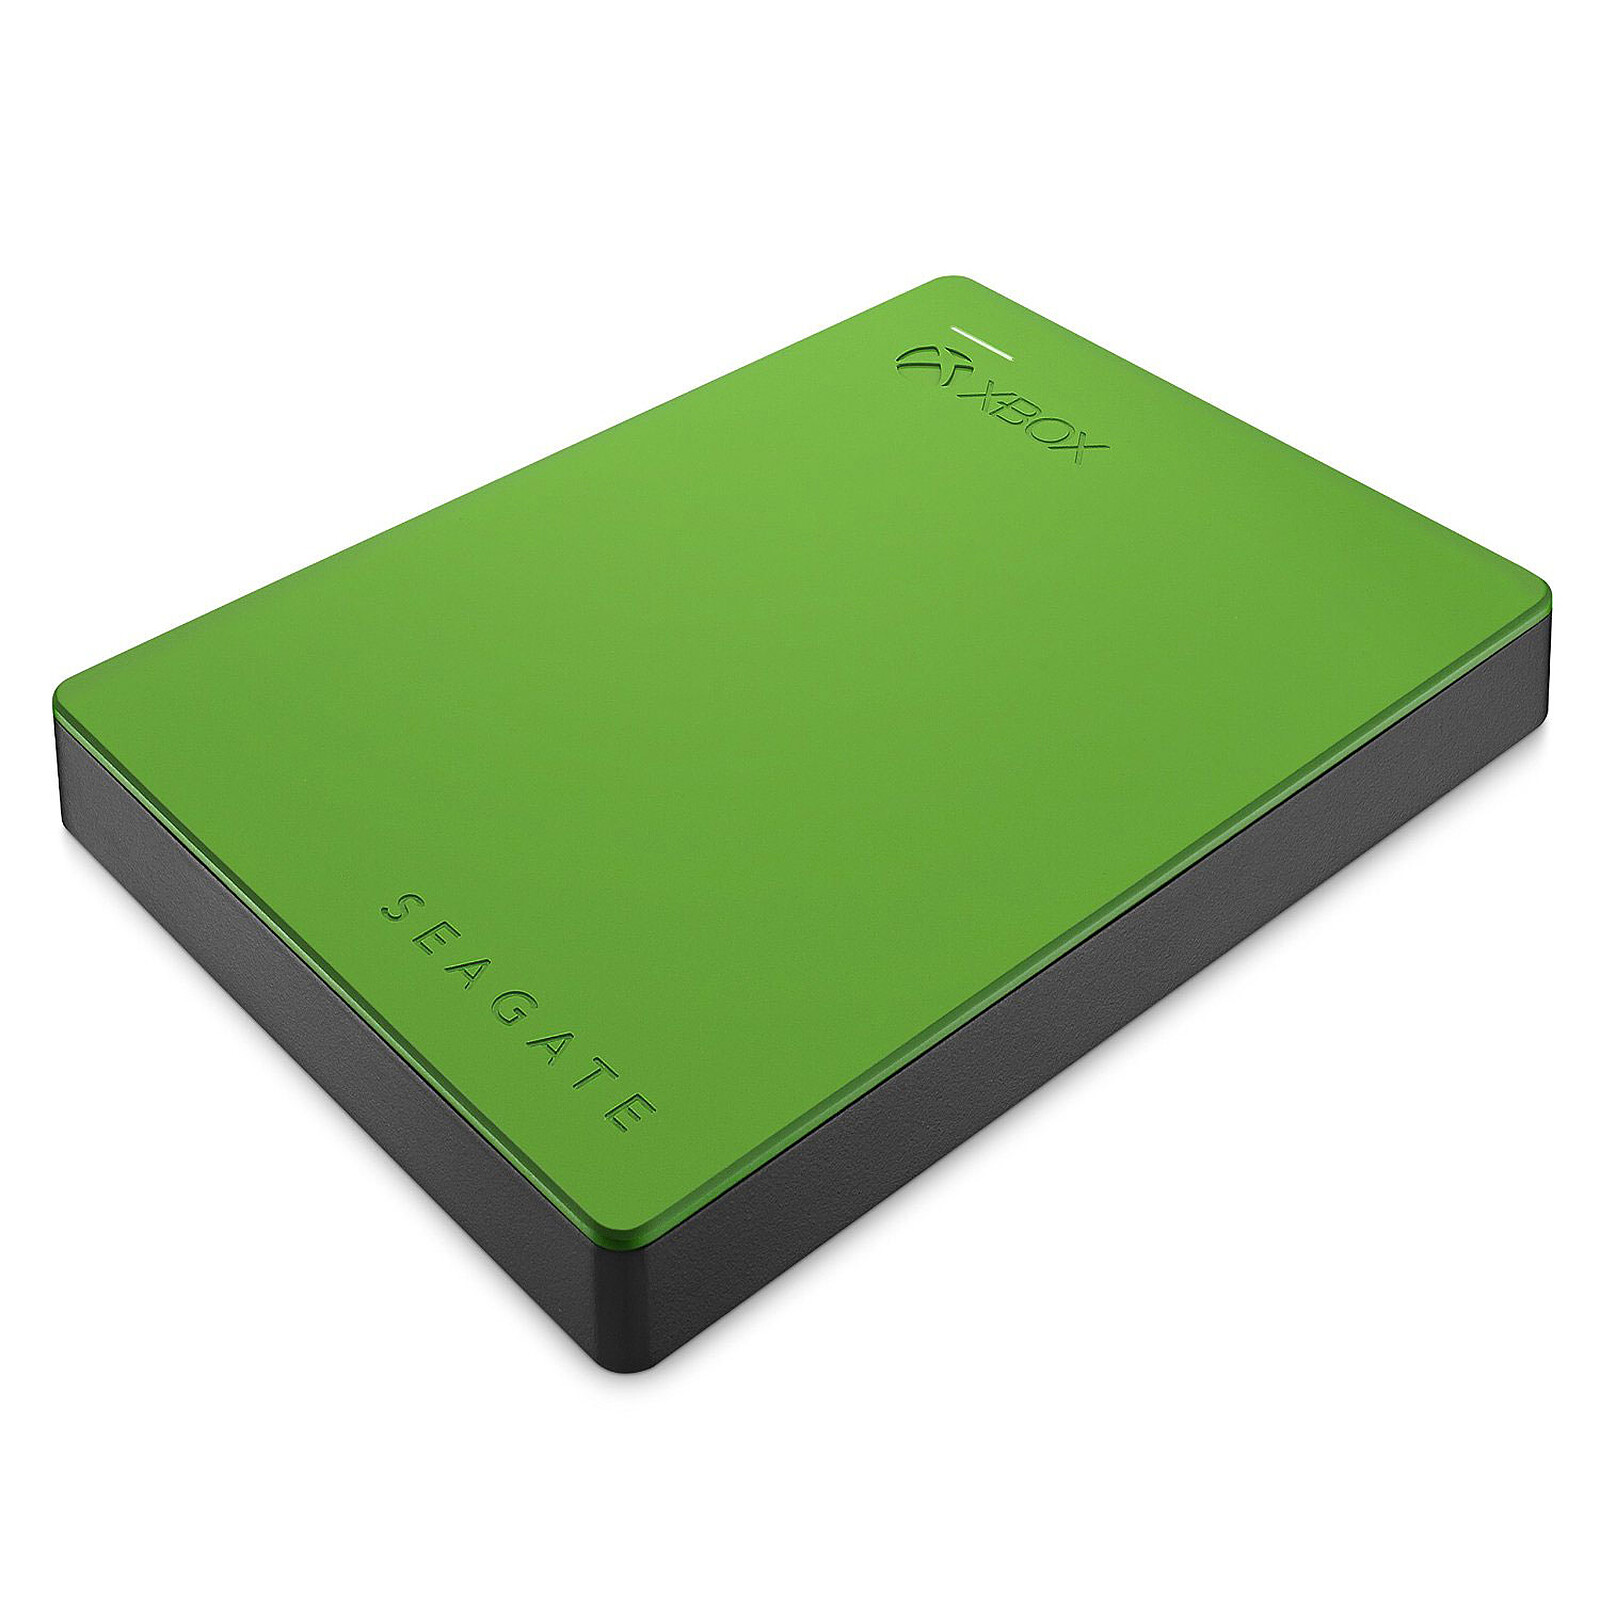 Seagate Game Drive 4Tb Green - Xbox One accessories - LDLC 3-year